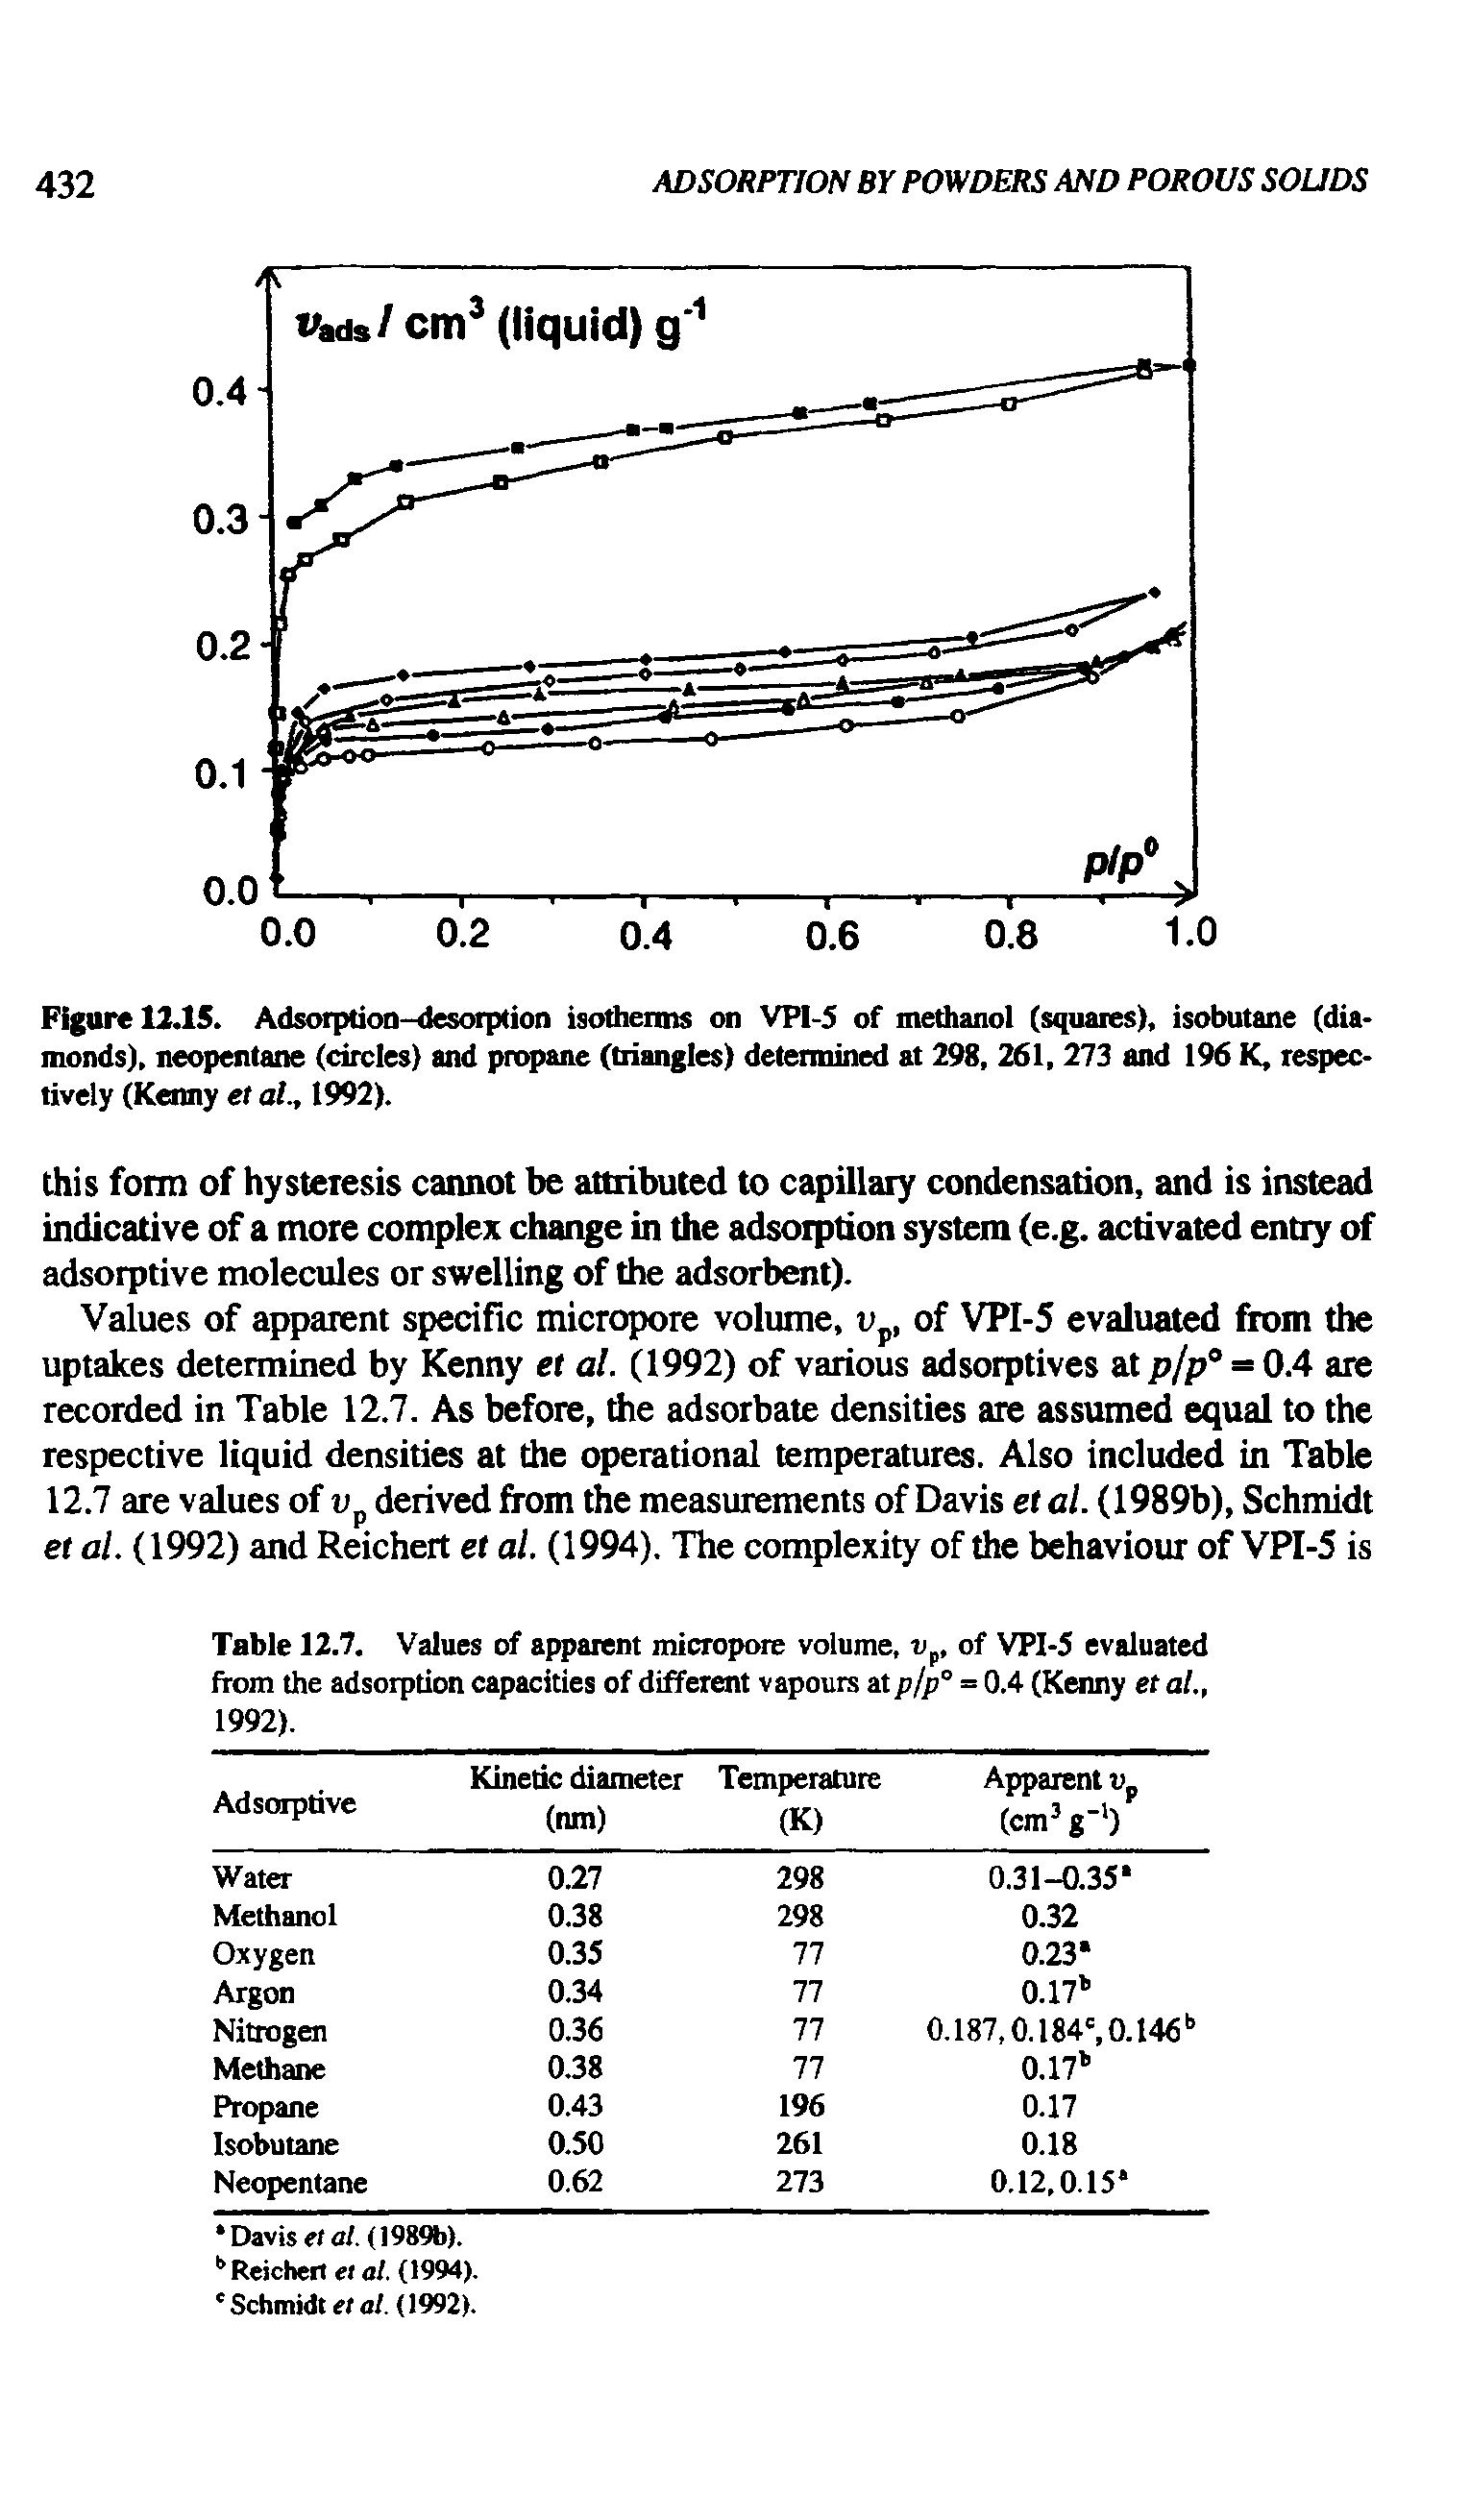 Figure 12.15. Adsorption-desorption isotherms on VPI-5 of methanol (squares), isobutane (diamonds). neopentane (circles) and propane (triangles) determined at 298, 261, 273 and 196 K, respectively (Kenny et al., 1992).